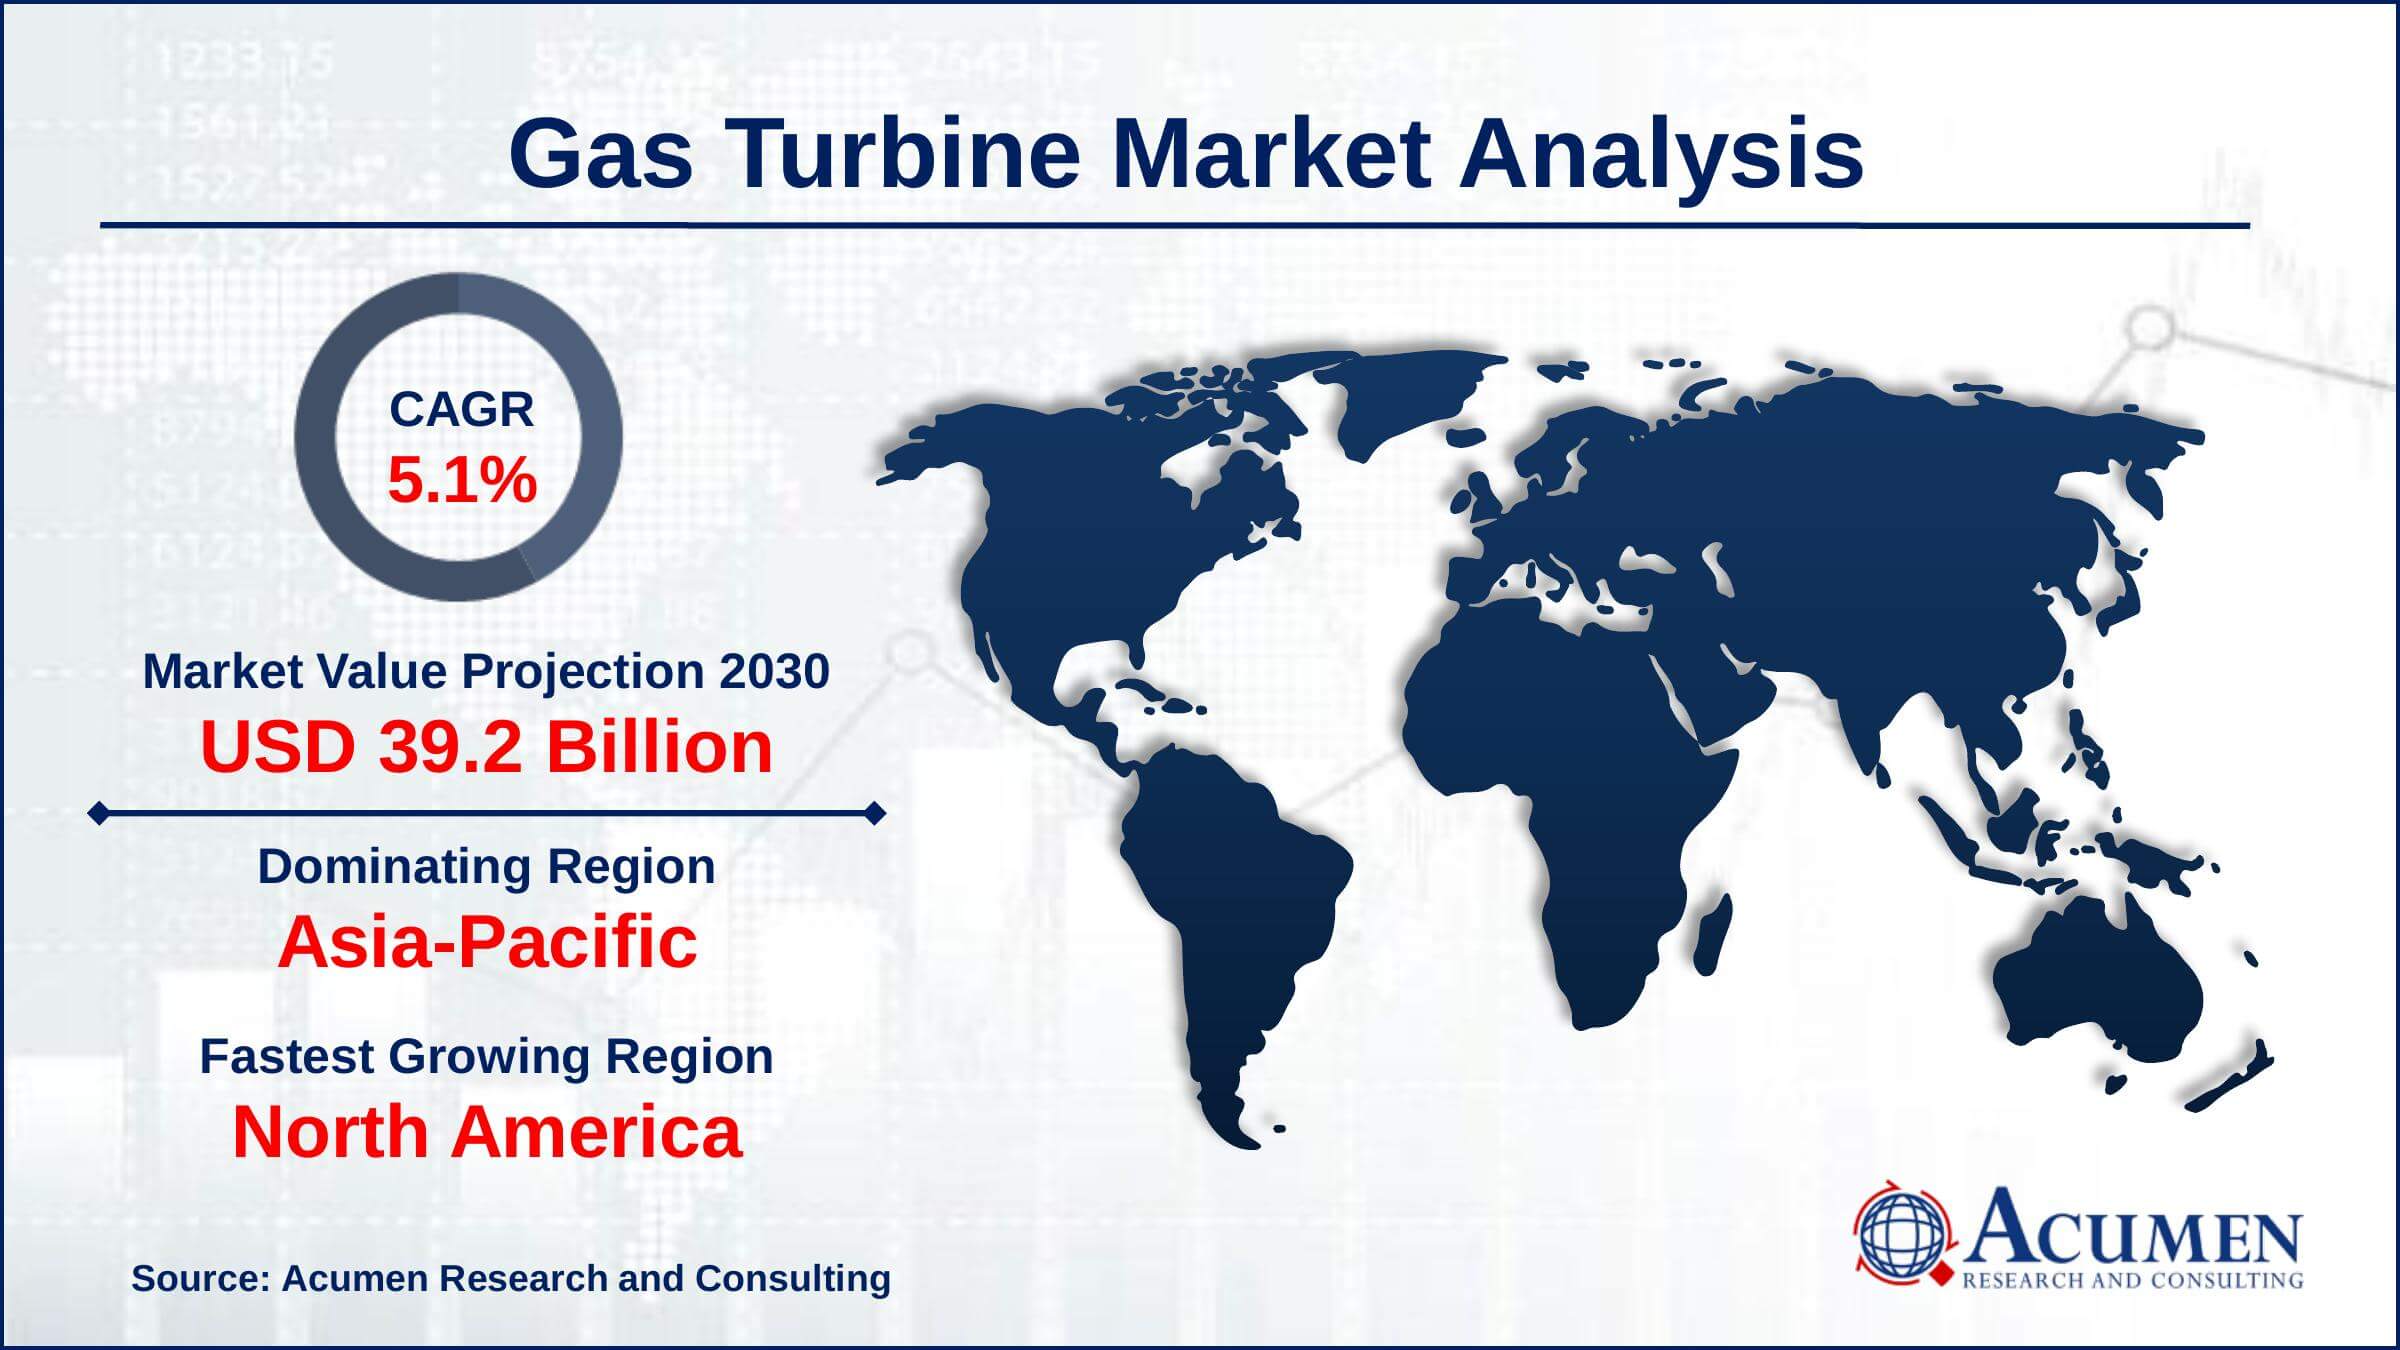 North America gas turbine market growth will observe highest CAGR from 2022 to 2030